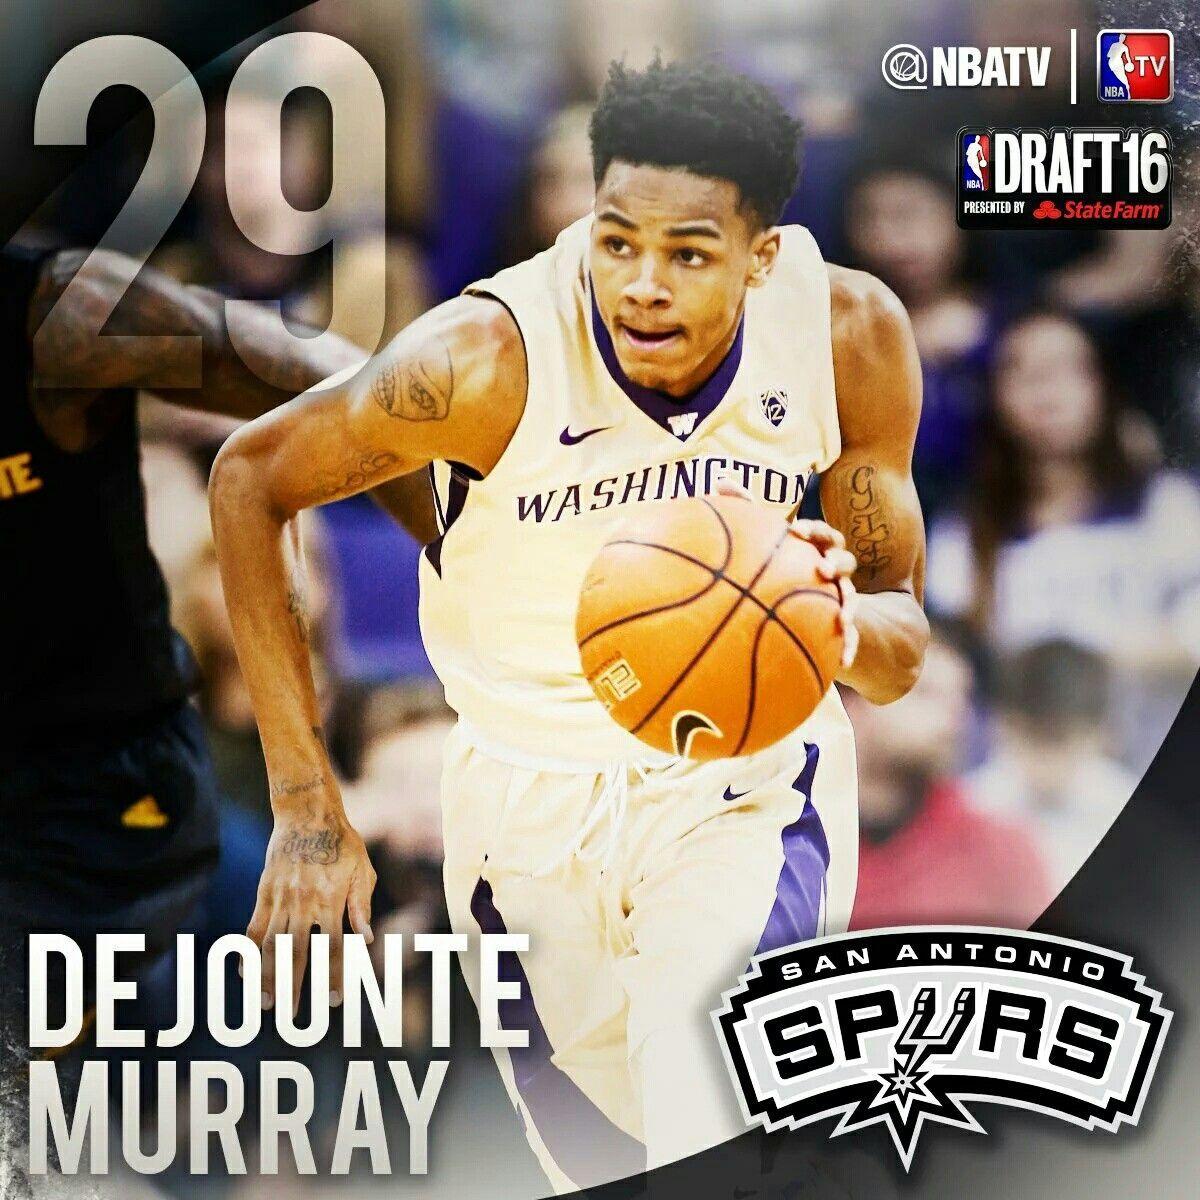 San Antonio Spurs selected Dejounte Murray with the 29th pick. NBA